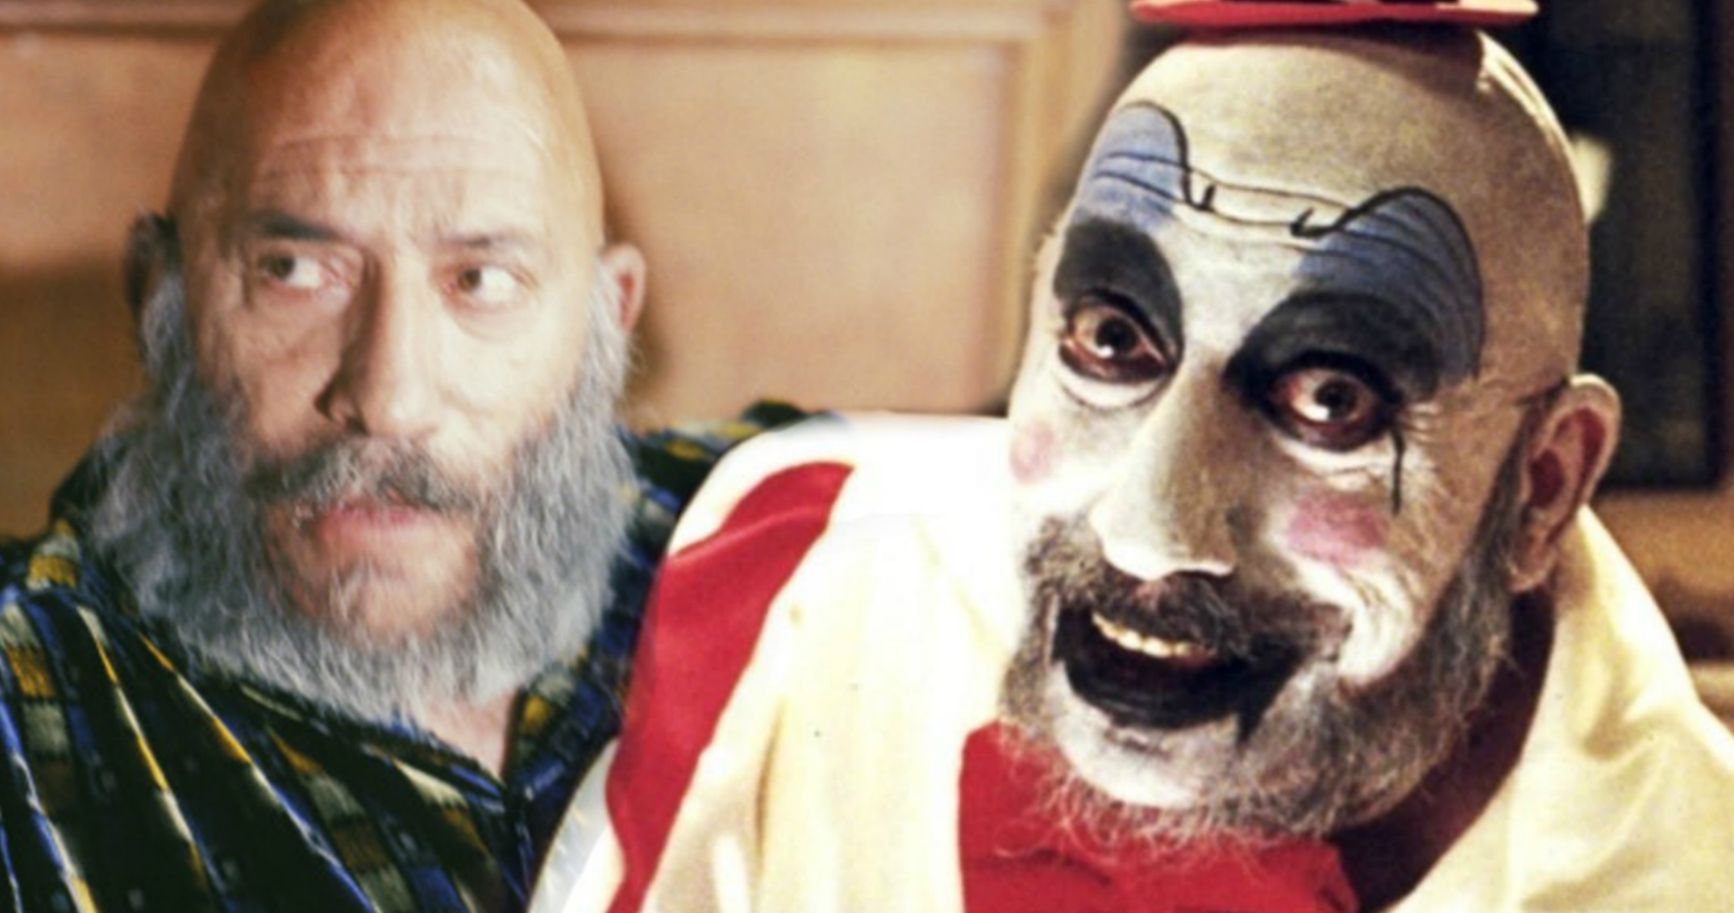 Sid Haig Dies at 80, Genre Icon and Star of House of 1000 Corpses